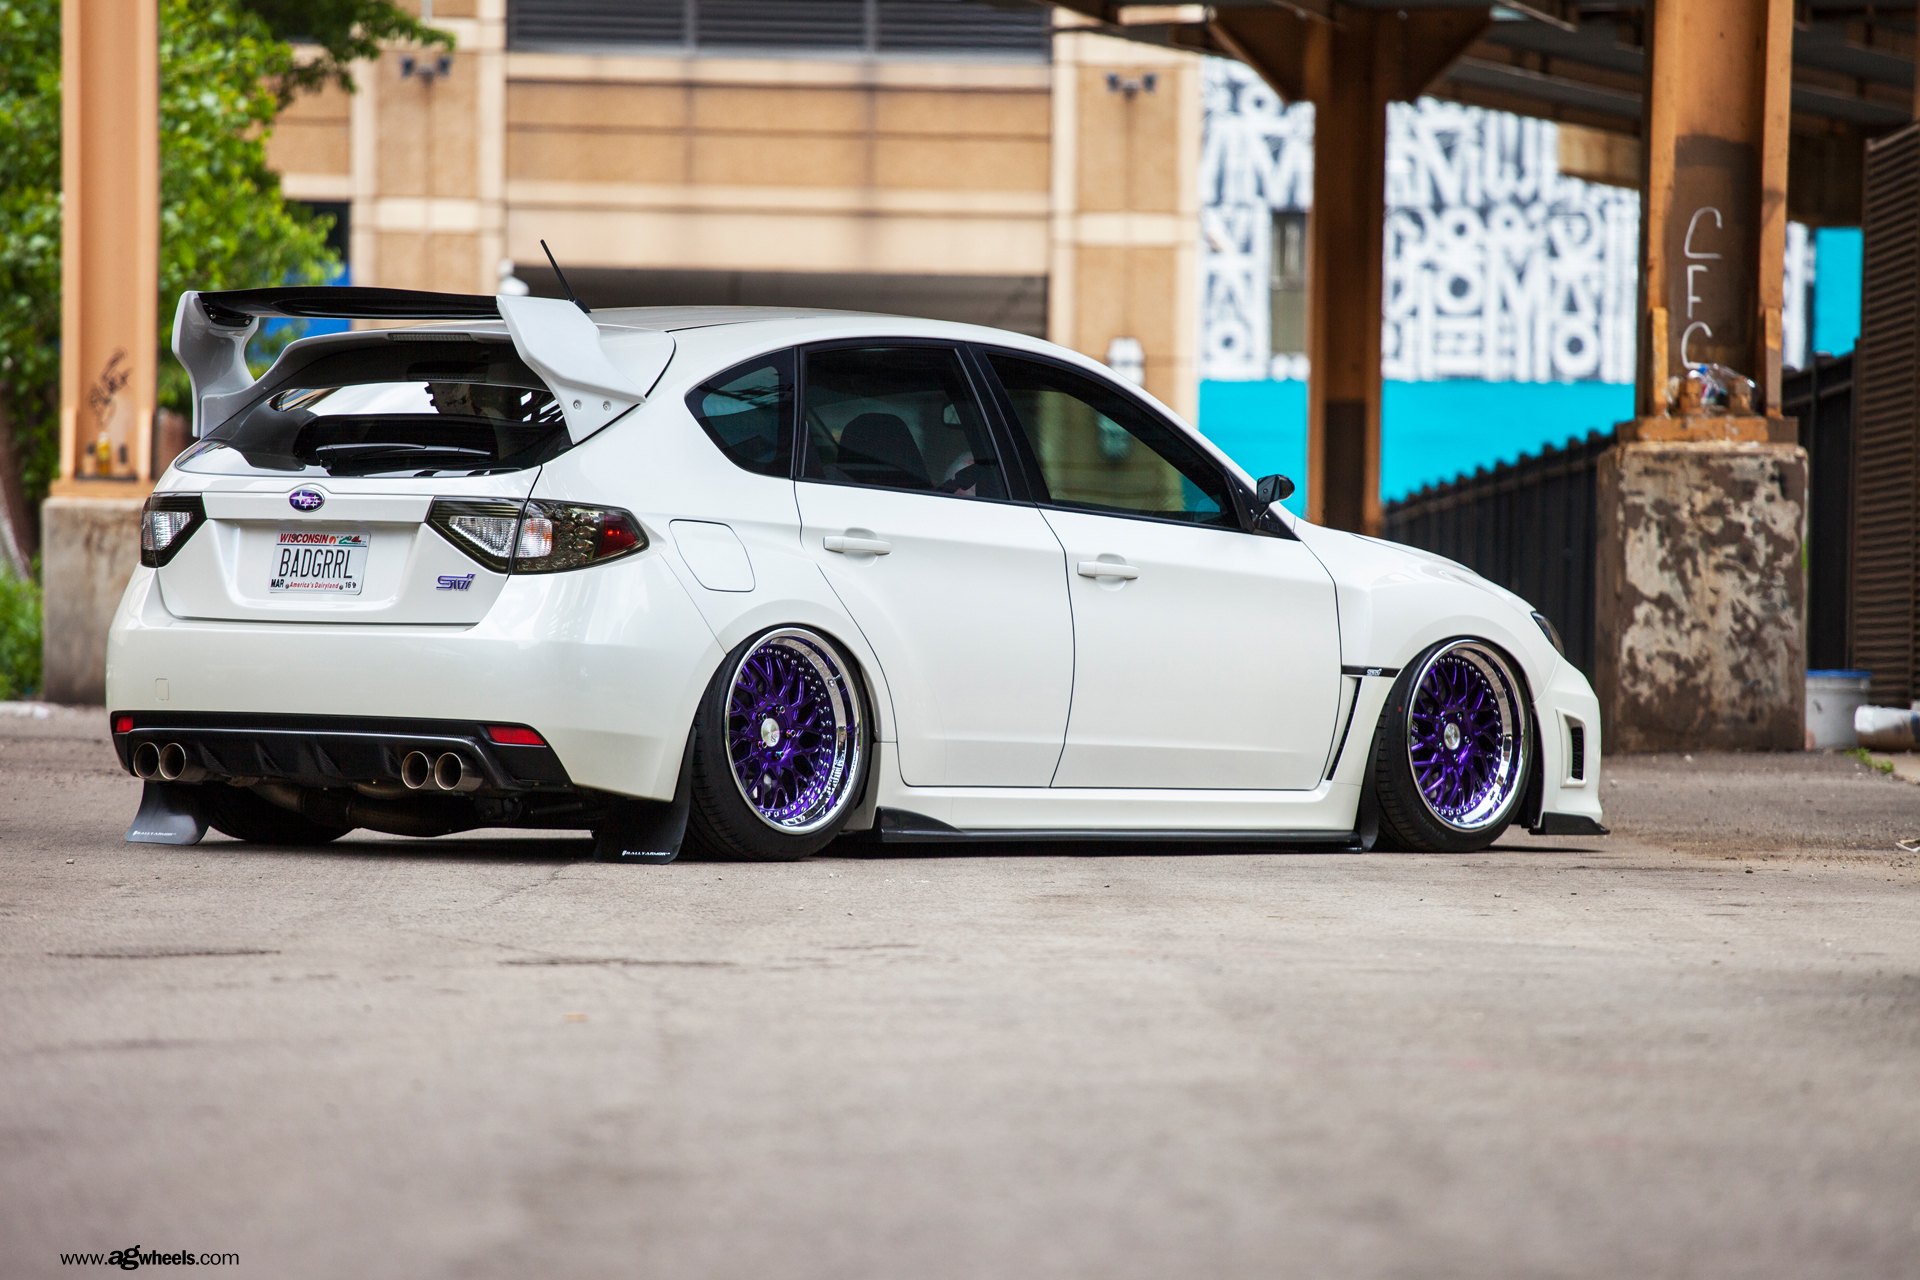 White Subaru WRX with Large Wing Spoiler - Photo by Avant Garde Wheels